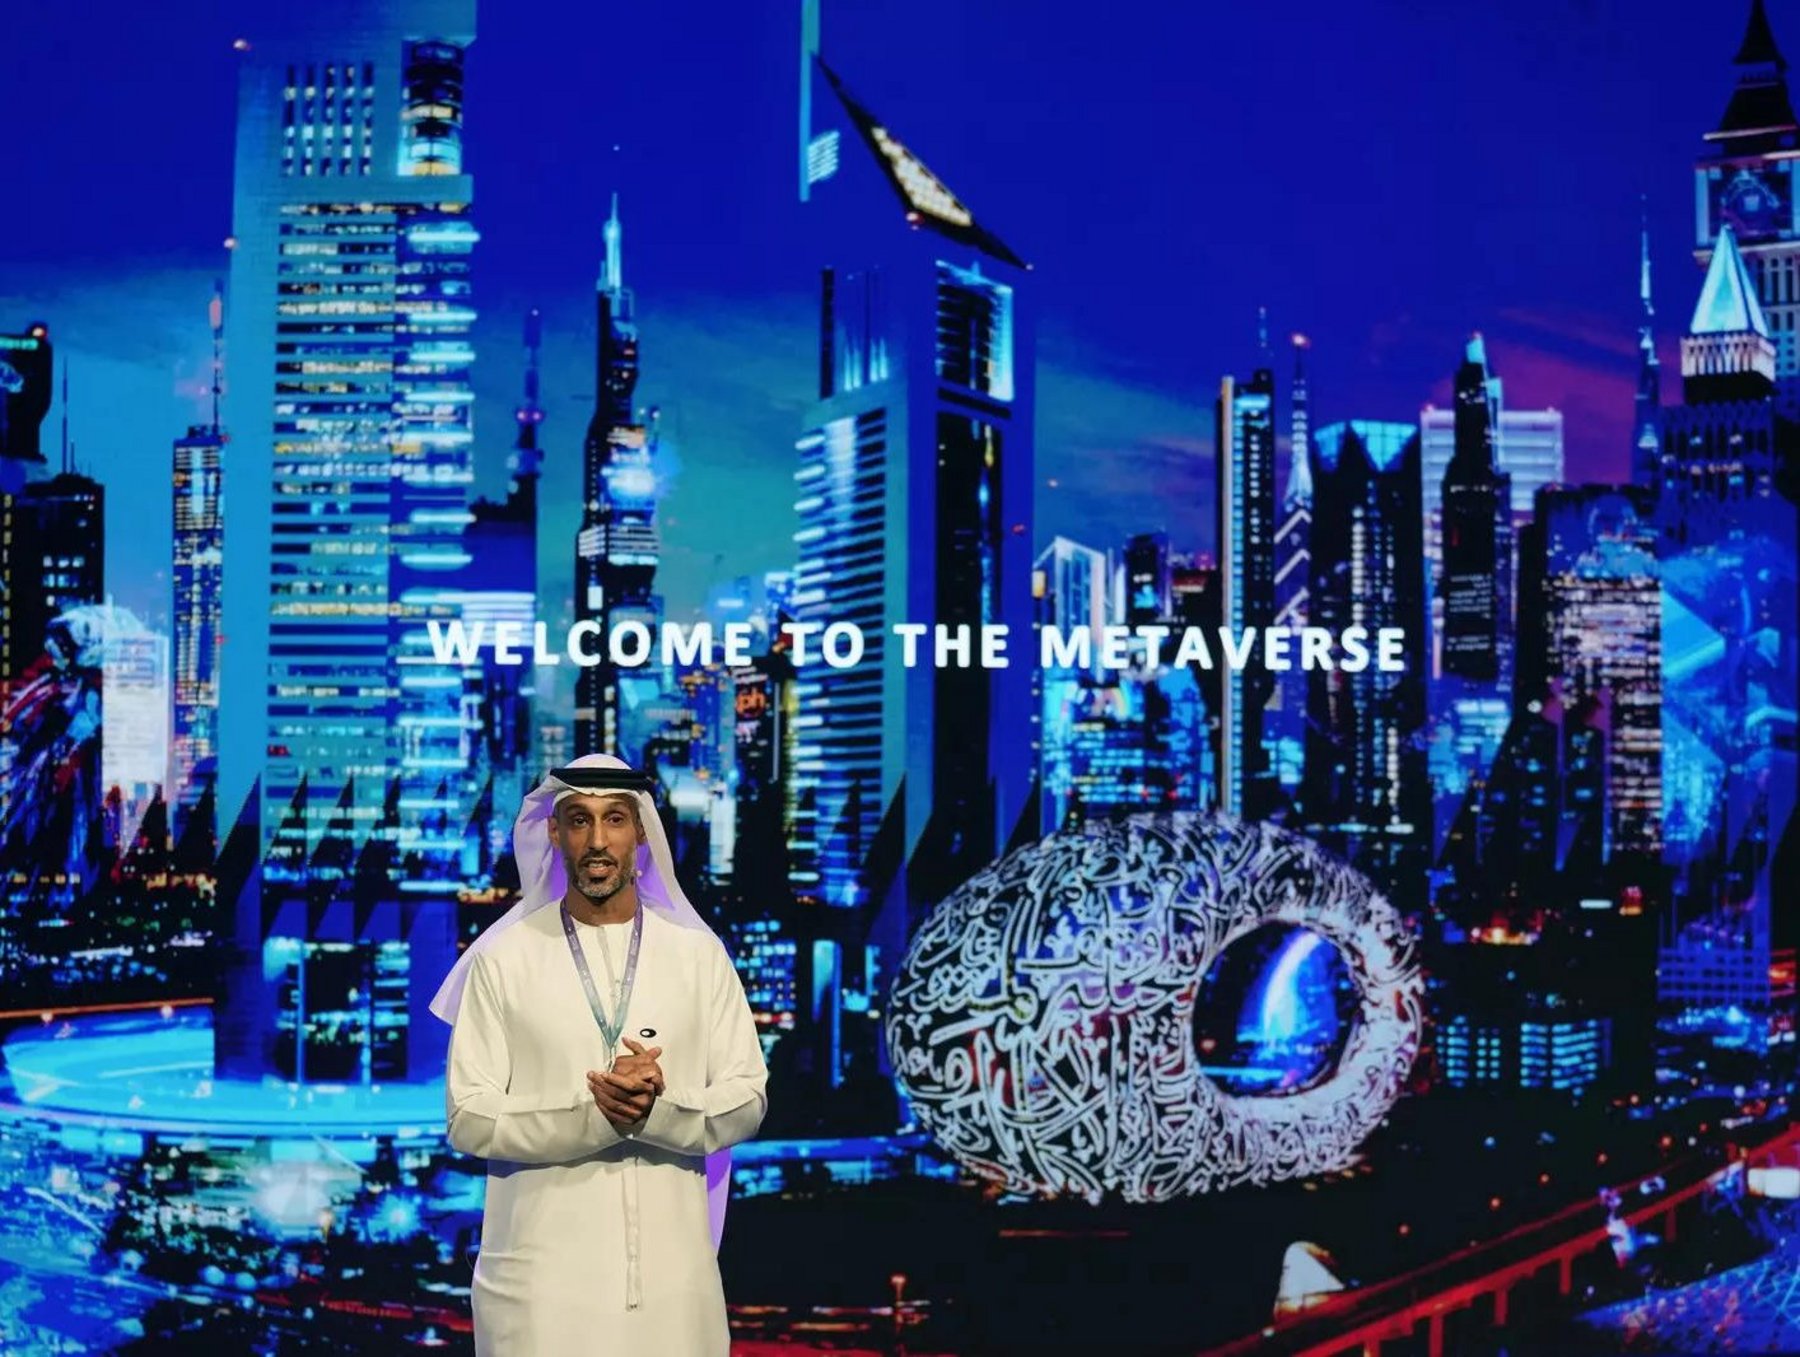 The Dubai Future Foundation is a driving force behind Dubai's vision for  the future. Through its various initiatives, the foundation is working to  create a better world for all, by harnessing the